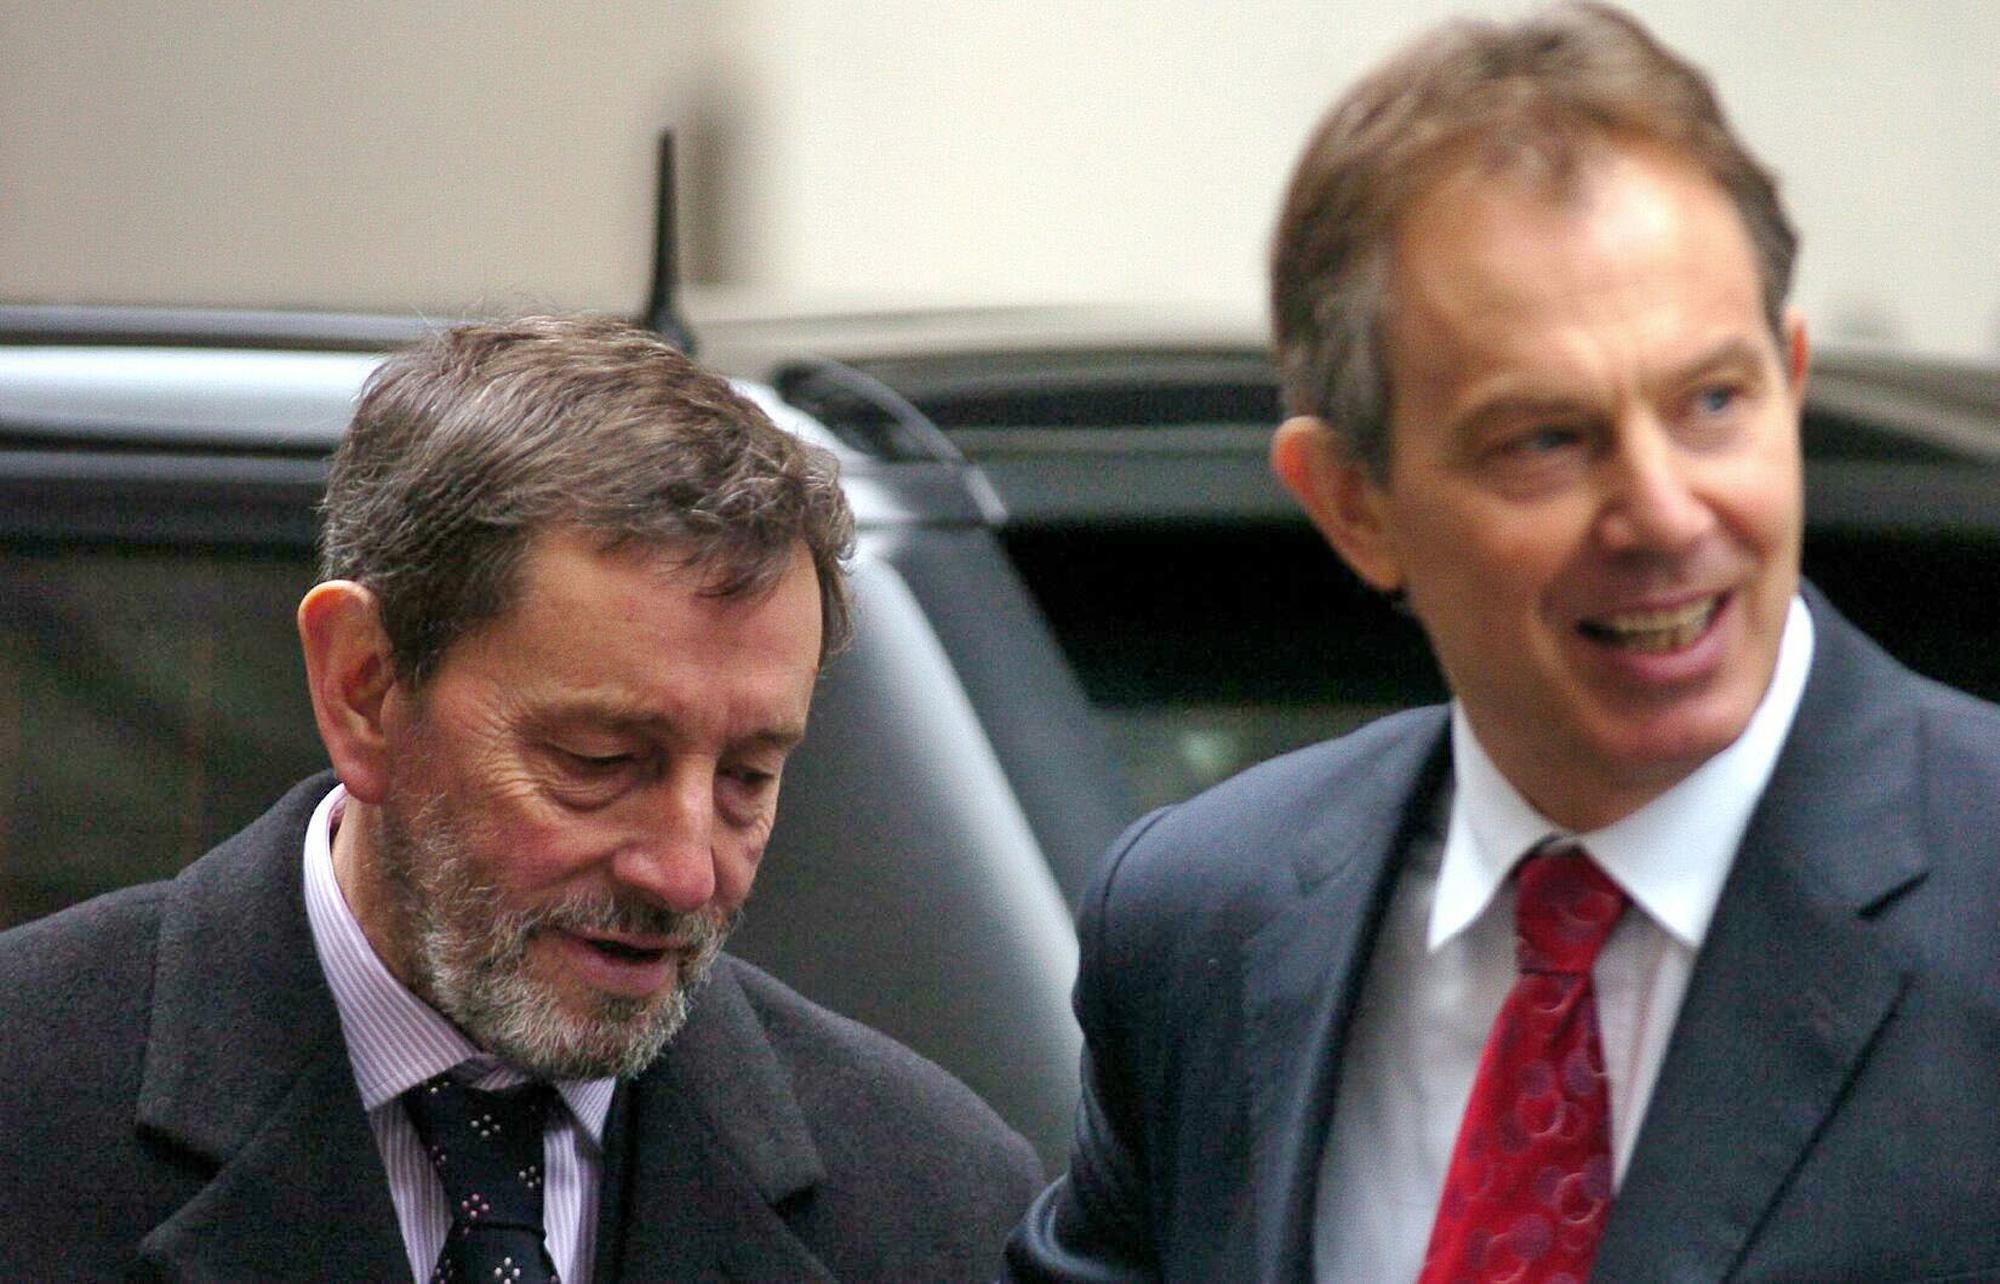 Tony Blair (right) was warned by David Blunkett (left) about repealing the law banning ‘promotion’ of homosexuality in schools (Michael Stephens/PA)